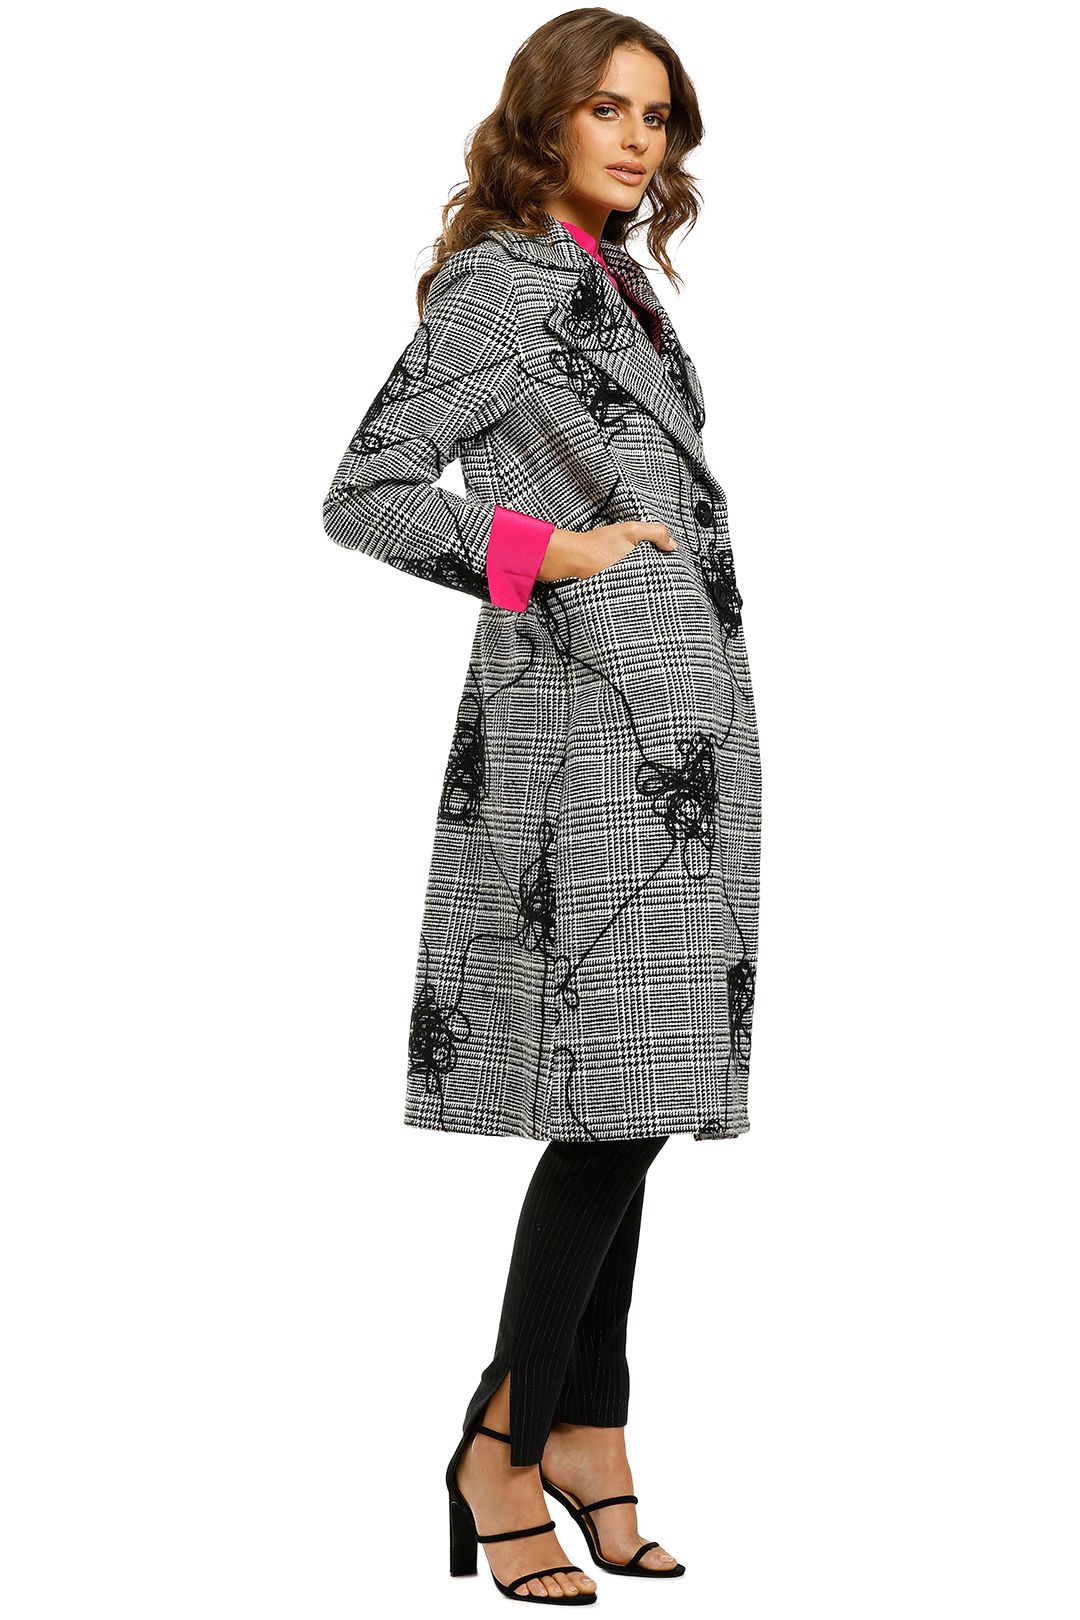 Curate-by-Trelise-Cooper-Button-Up-Coat-Check-Side